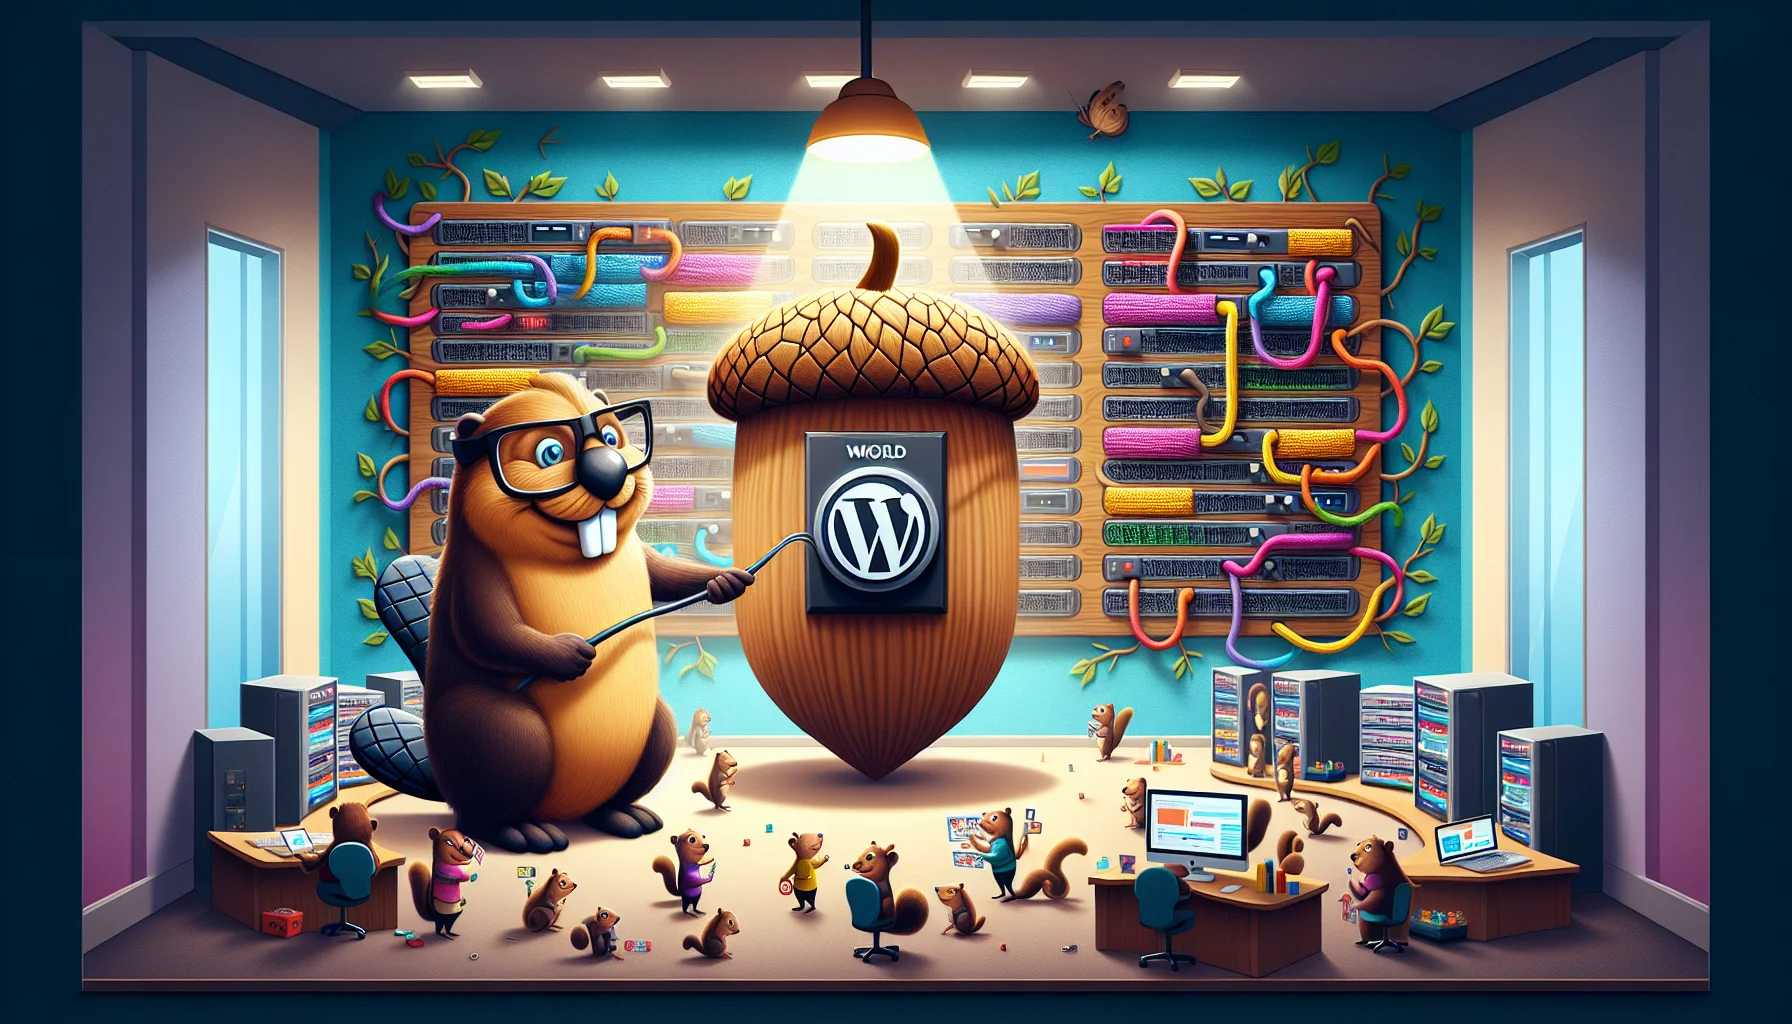 Envision a humorous scenario that represents a symbolic form of a managed WordPress hosting. Imagine, a giant symbolic switch being turned on by an anthropomorphic, jovial beaver wearing glasses, indicating the activation of the hosting services. He stands in a control room filled with blinking servers and intricate networks represented using colorful yarns where little helper squirrels are industriously managing the operations. On the wall, you see a stylized representation of a fast-forward symbol made of vines to hint at the high-speed connectivity this service promises. This entire setup is nestled cozily inside a giant acorn, cleverly symbolizing fortification, reliability and 'nature-infused technology'.